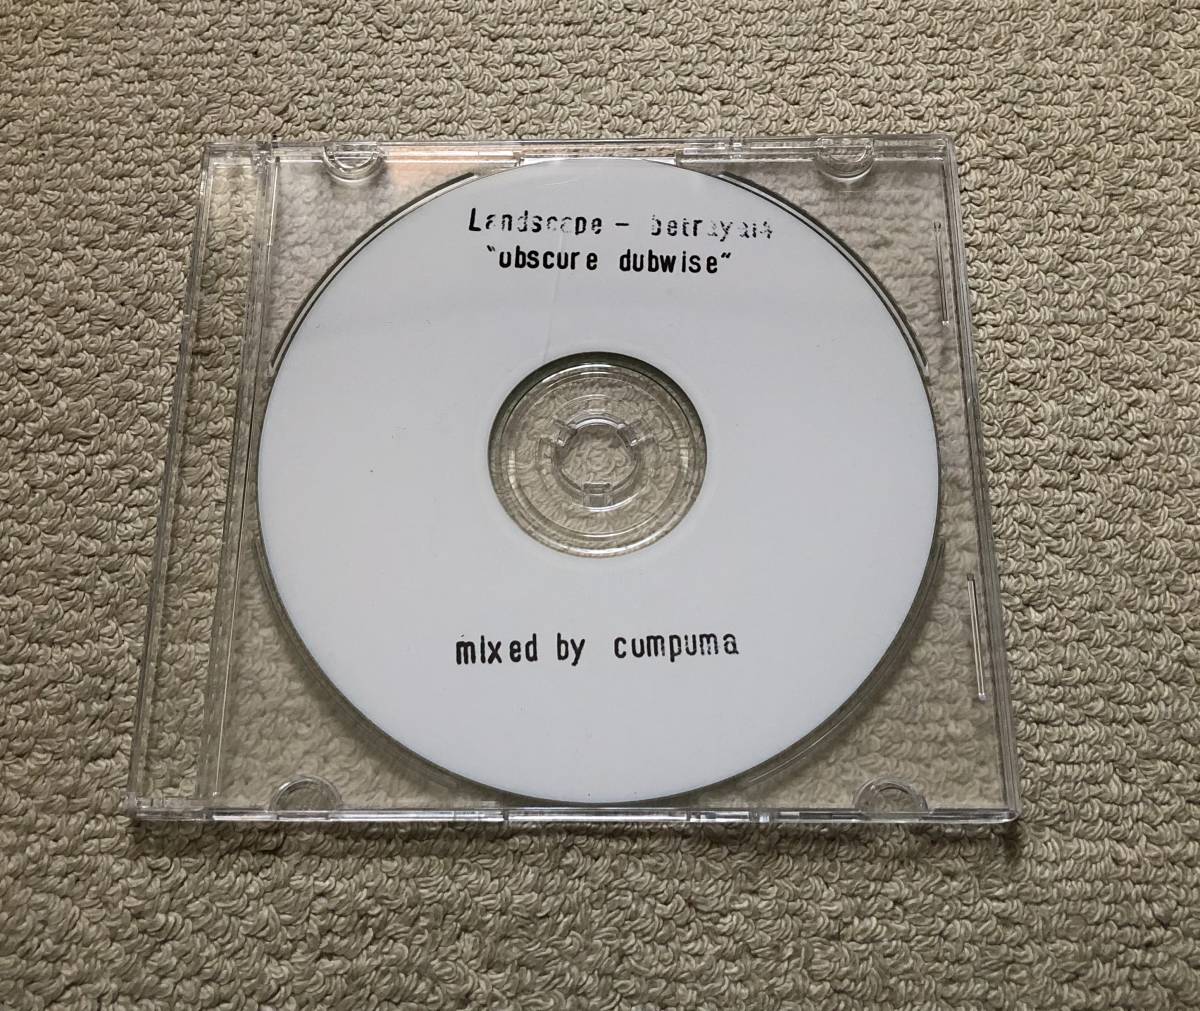 COMPUMA / Landscape betrayal4 ;obscure dubwise MIX CD for searching Smurf man collection demon. marsh hing CMT SHHHHH DJ HIKARU LOS APSON KILLER BONG